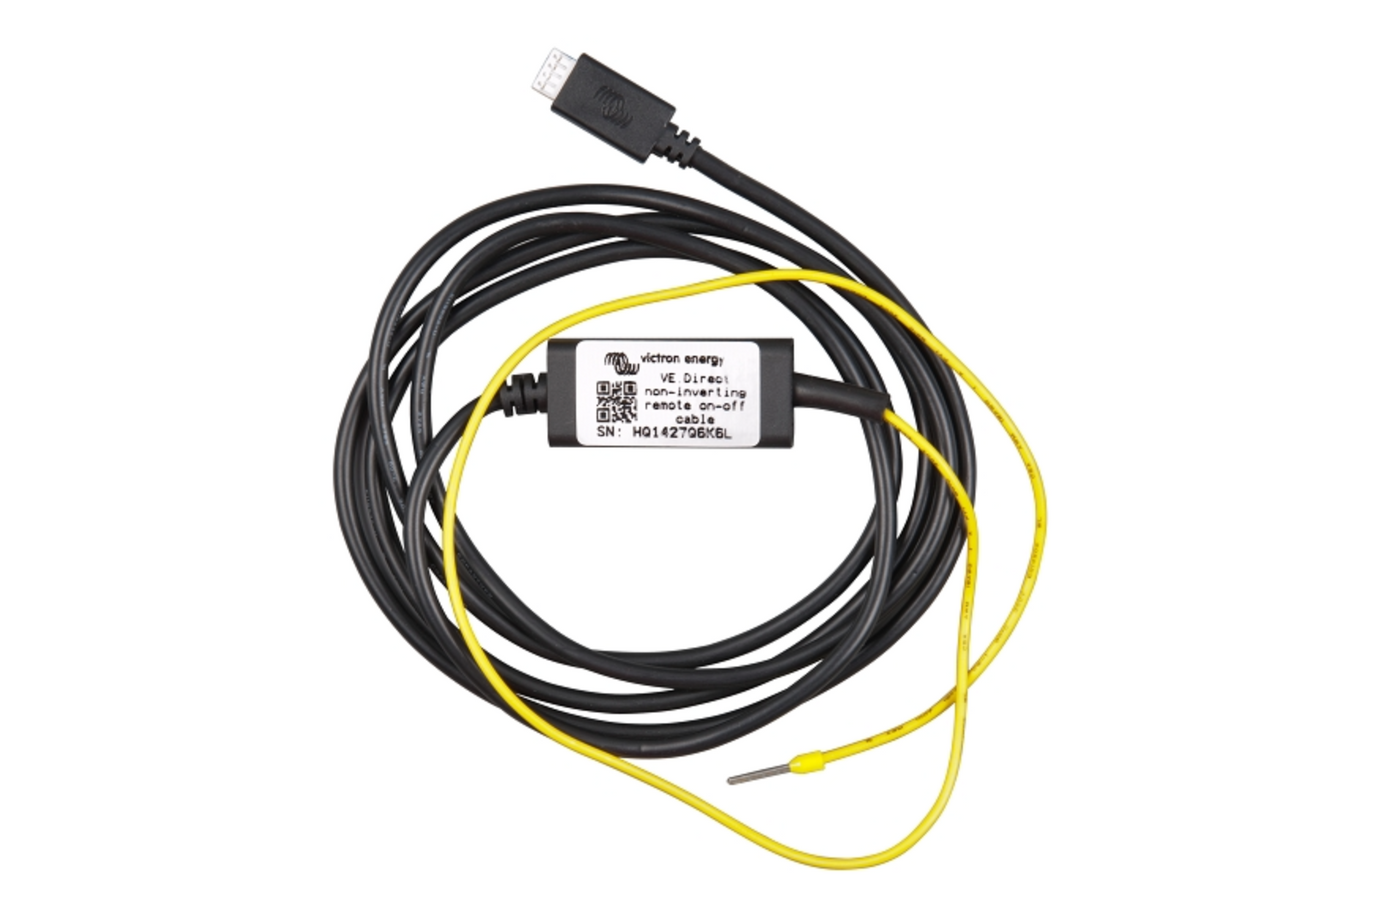 VE.Direct non-inverting remote on-off cable by Victron Energy